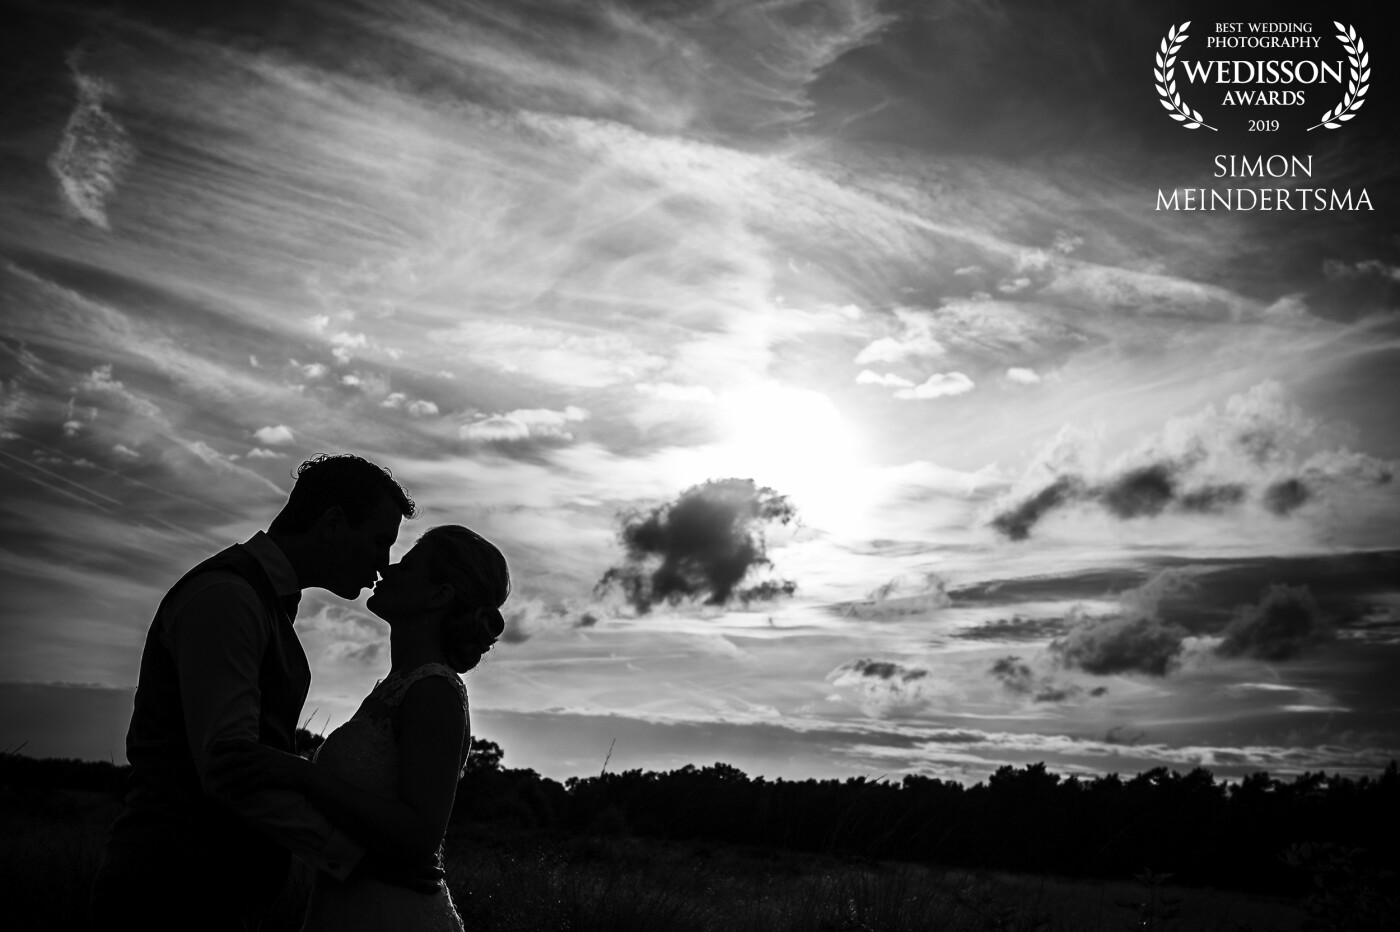 At the beautiful outer lands, this evening shot was taken with an early evening sun... the nice silhouette with the couple makes this image so much intense in black & white.